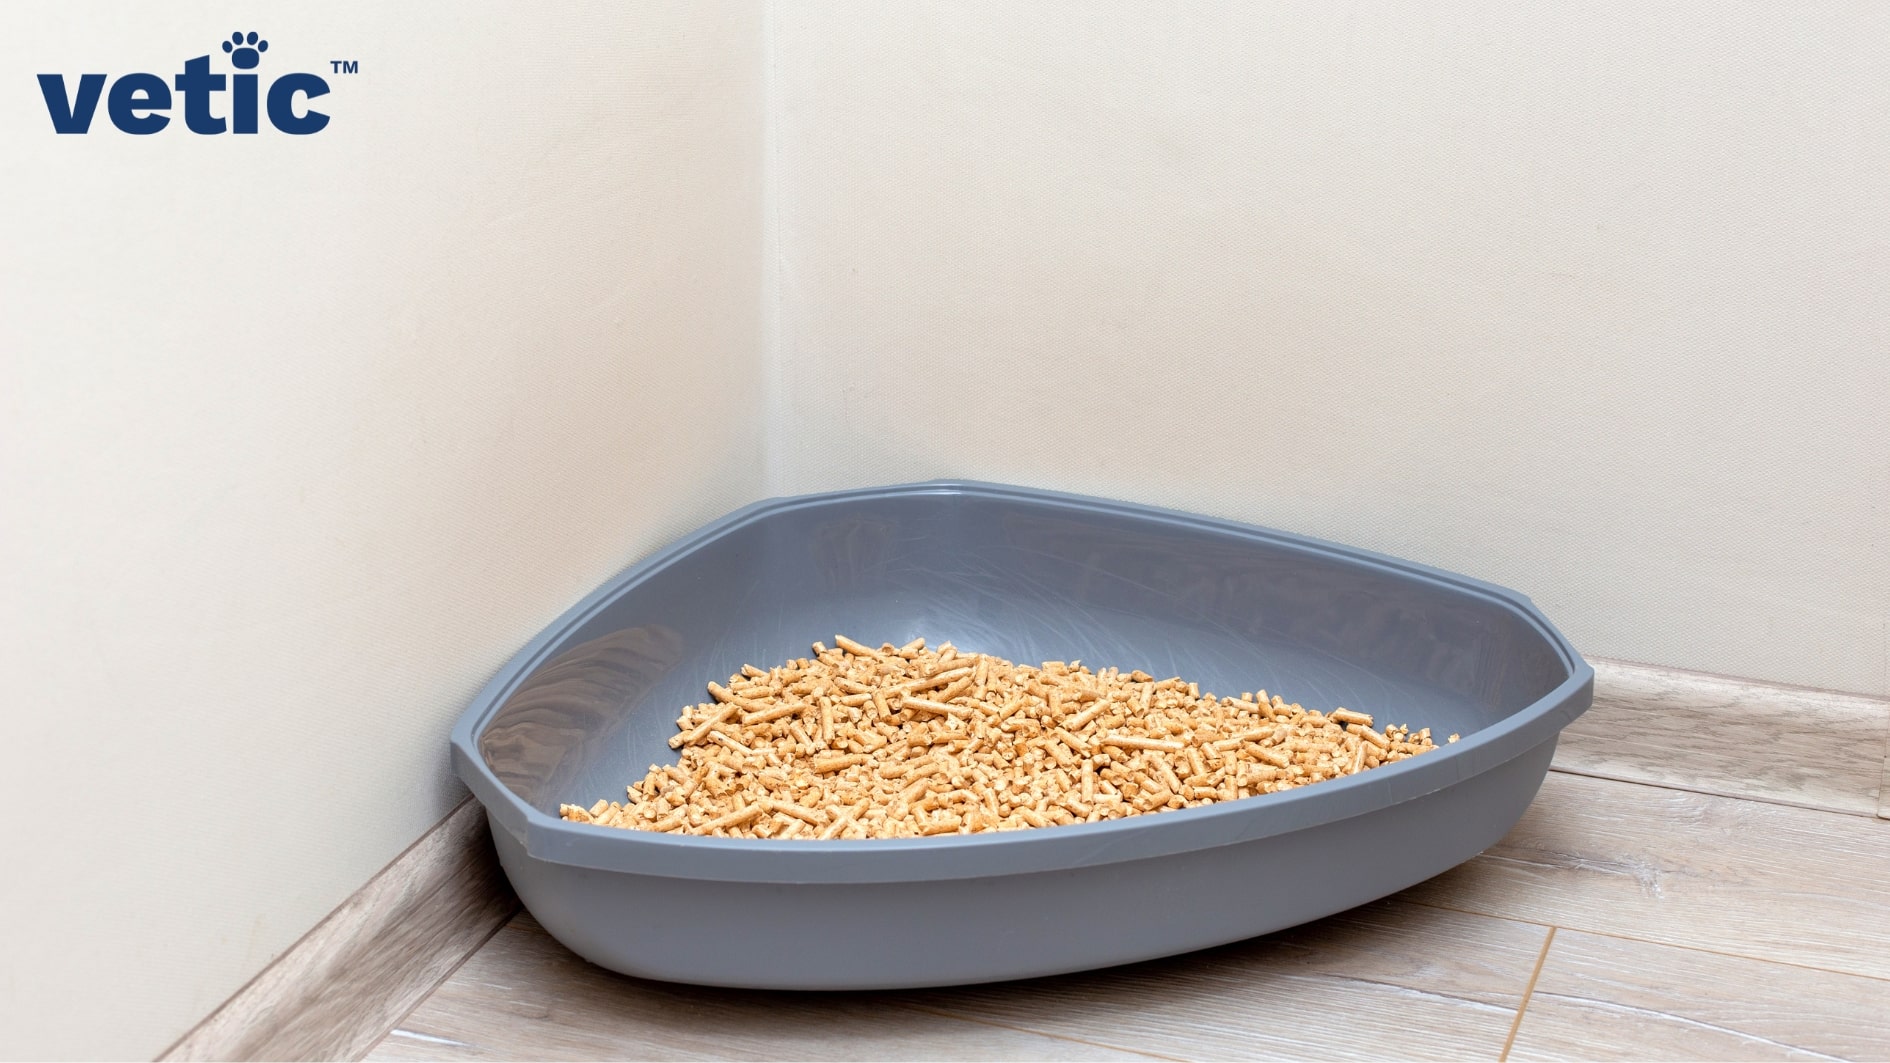 A greyish-blue, low-edge corner litter box filled with wooden pellet or litter kept on a hardwood floor against white walls. New cat owners must choose a low-edge box like this one for their smaller kittens.